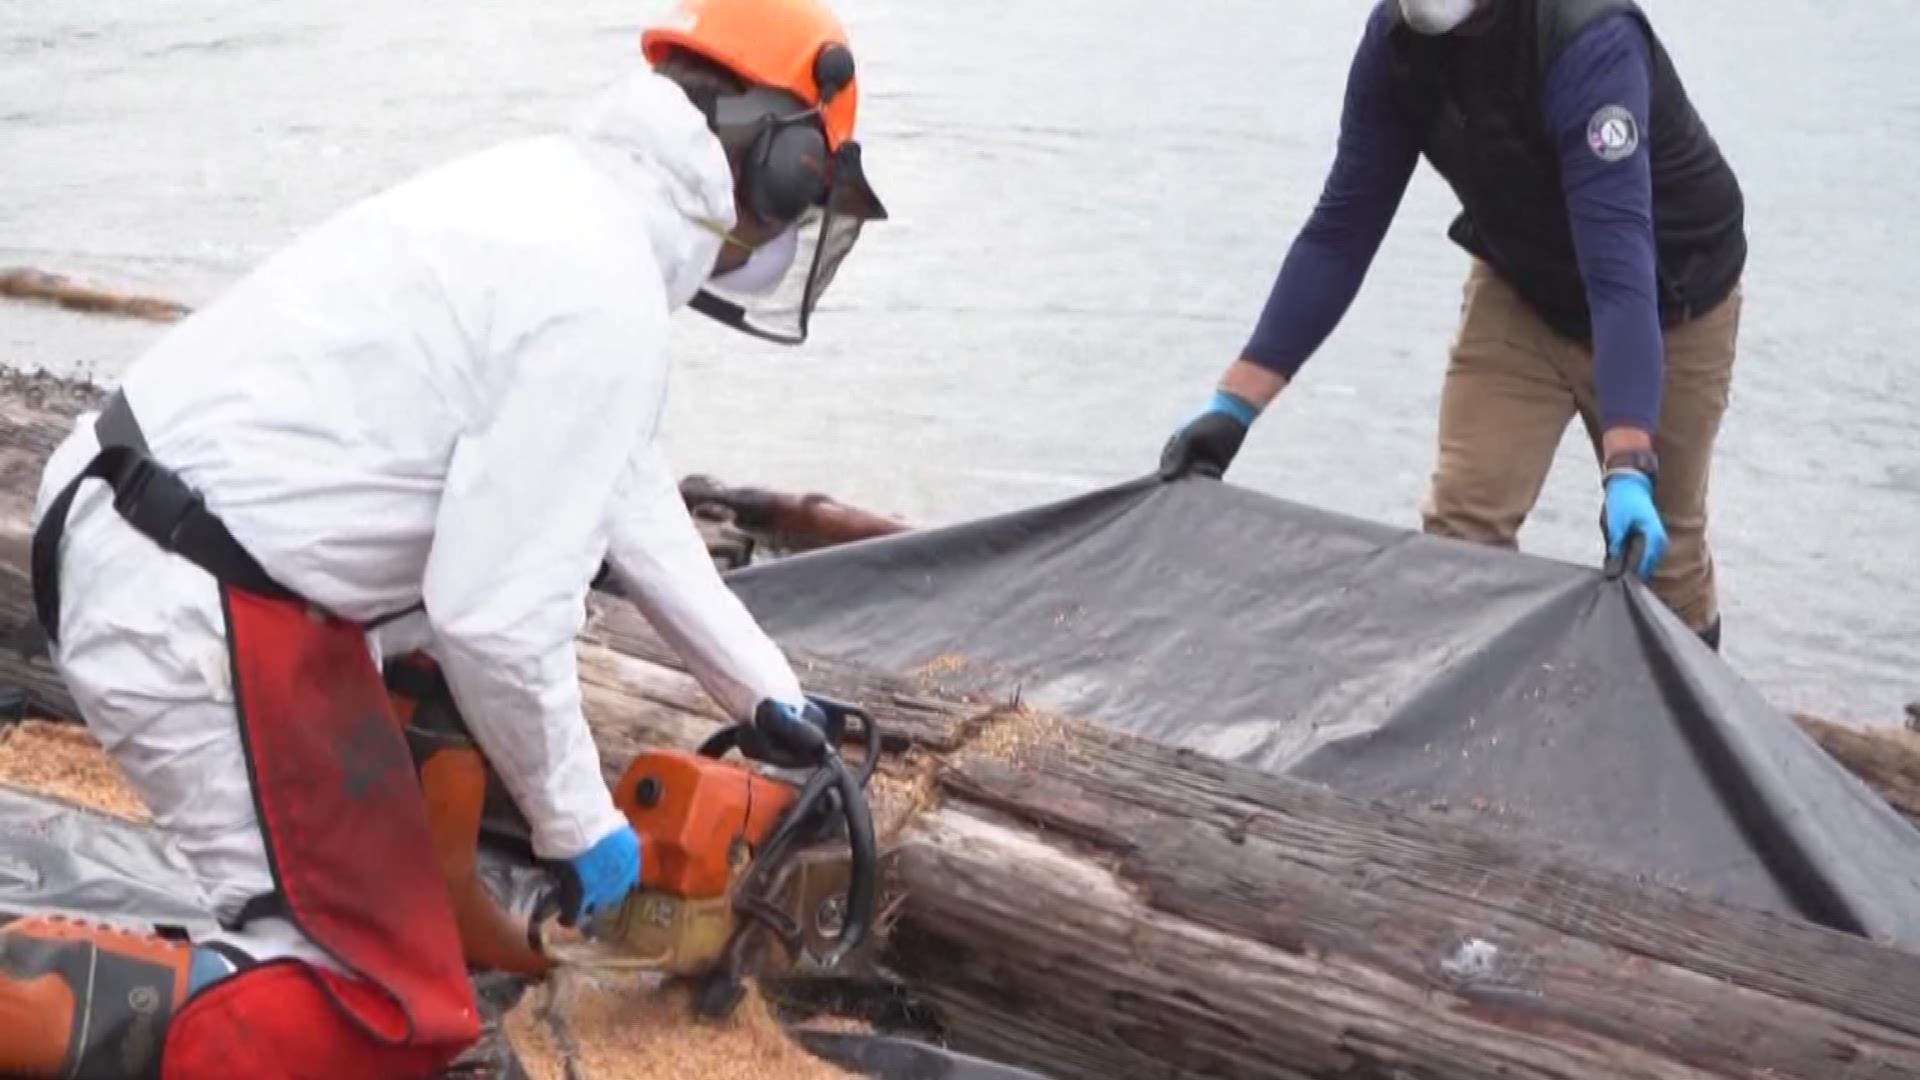 Crews with the Department of Natural Resources are working hard to remove toxic wood from Puget Sound. The wood is coated in creosote, a coal tar product that experts say creates the effects of a slow oil spill over time. KING 5 Environmental Reporter Alison Morrow has more from West Seattle.